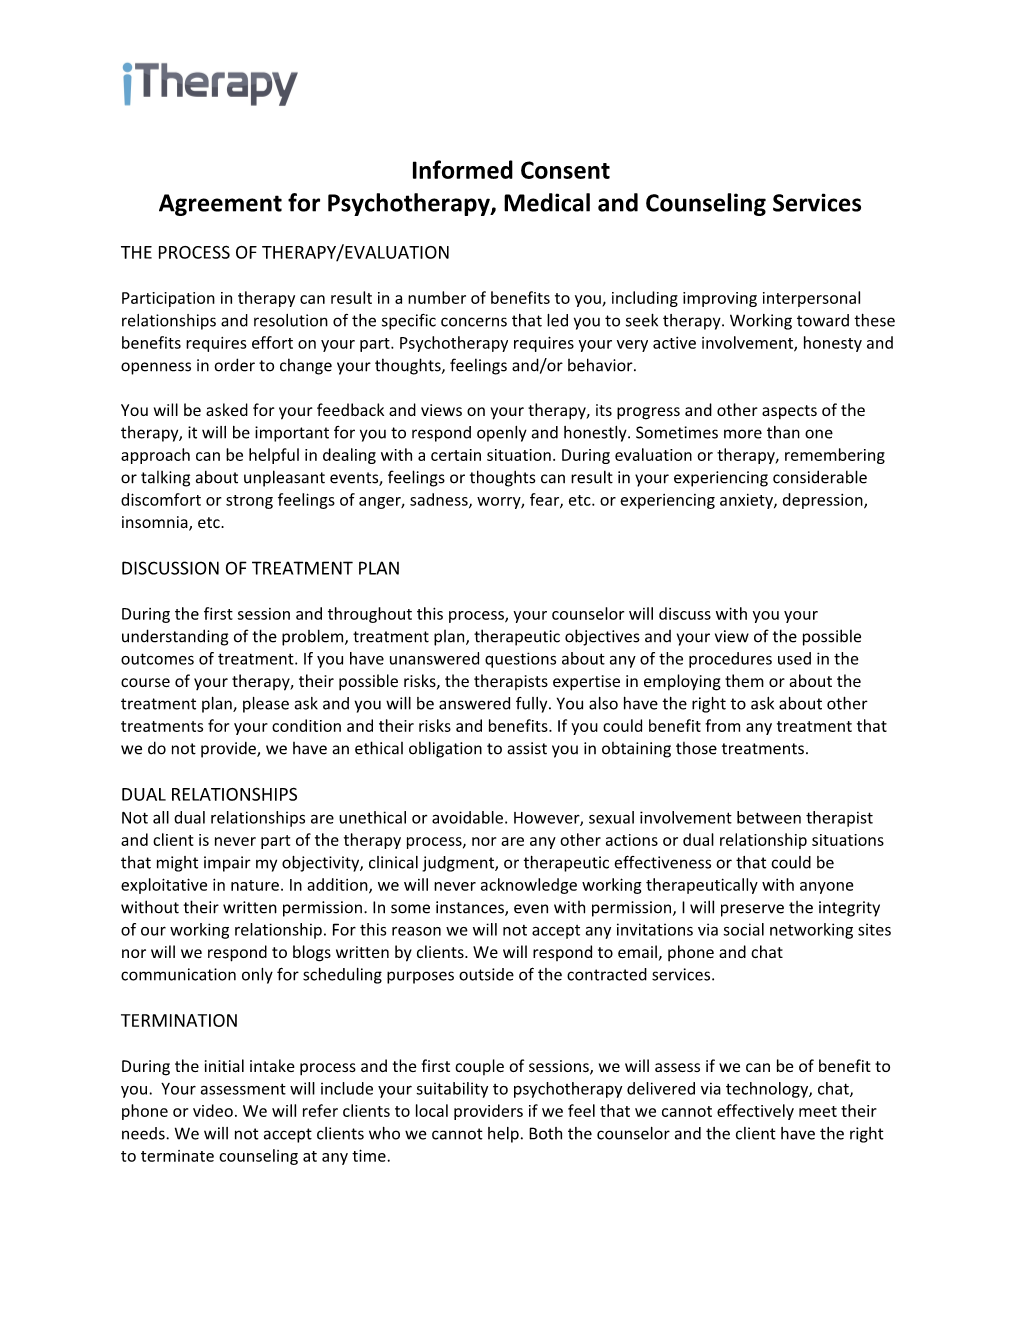 Agreement for Psychotherapy, Medical and Counseling Services